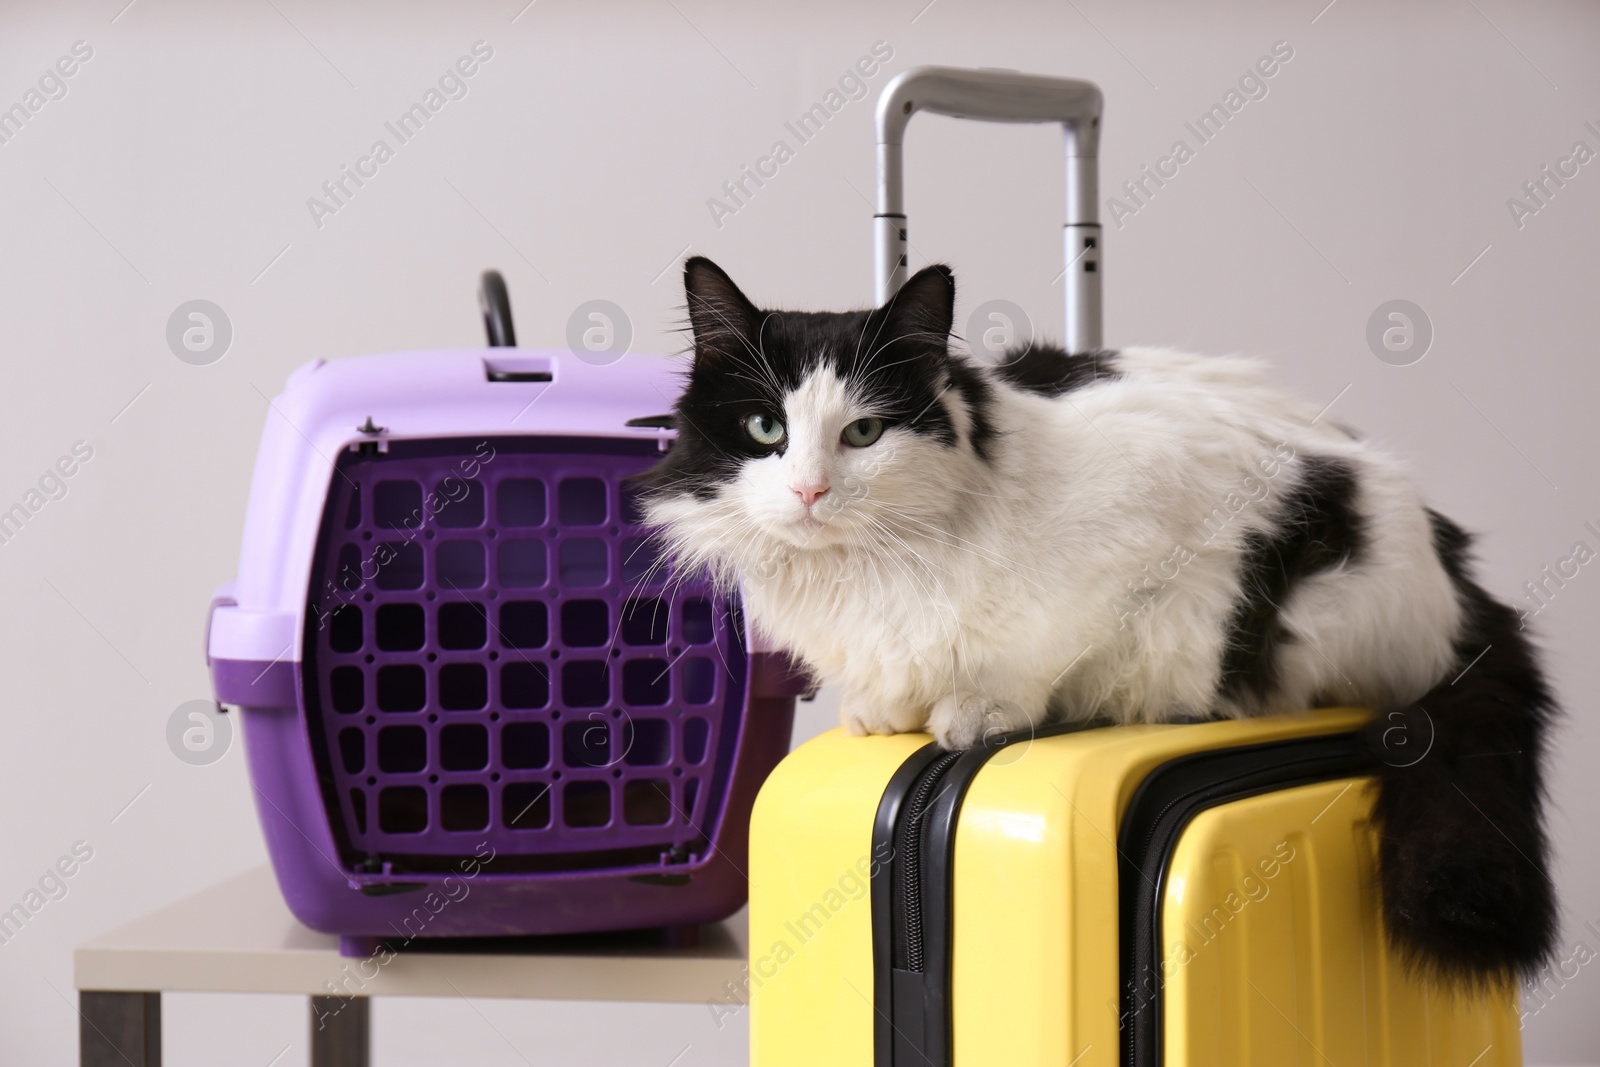 Photo of Cute cat sitting on suitcase and pet carrier against light grey background